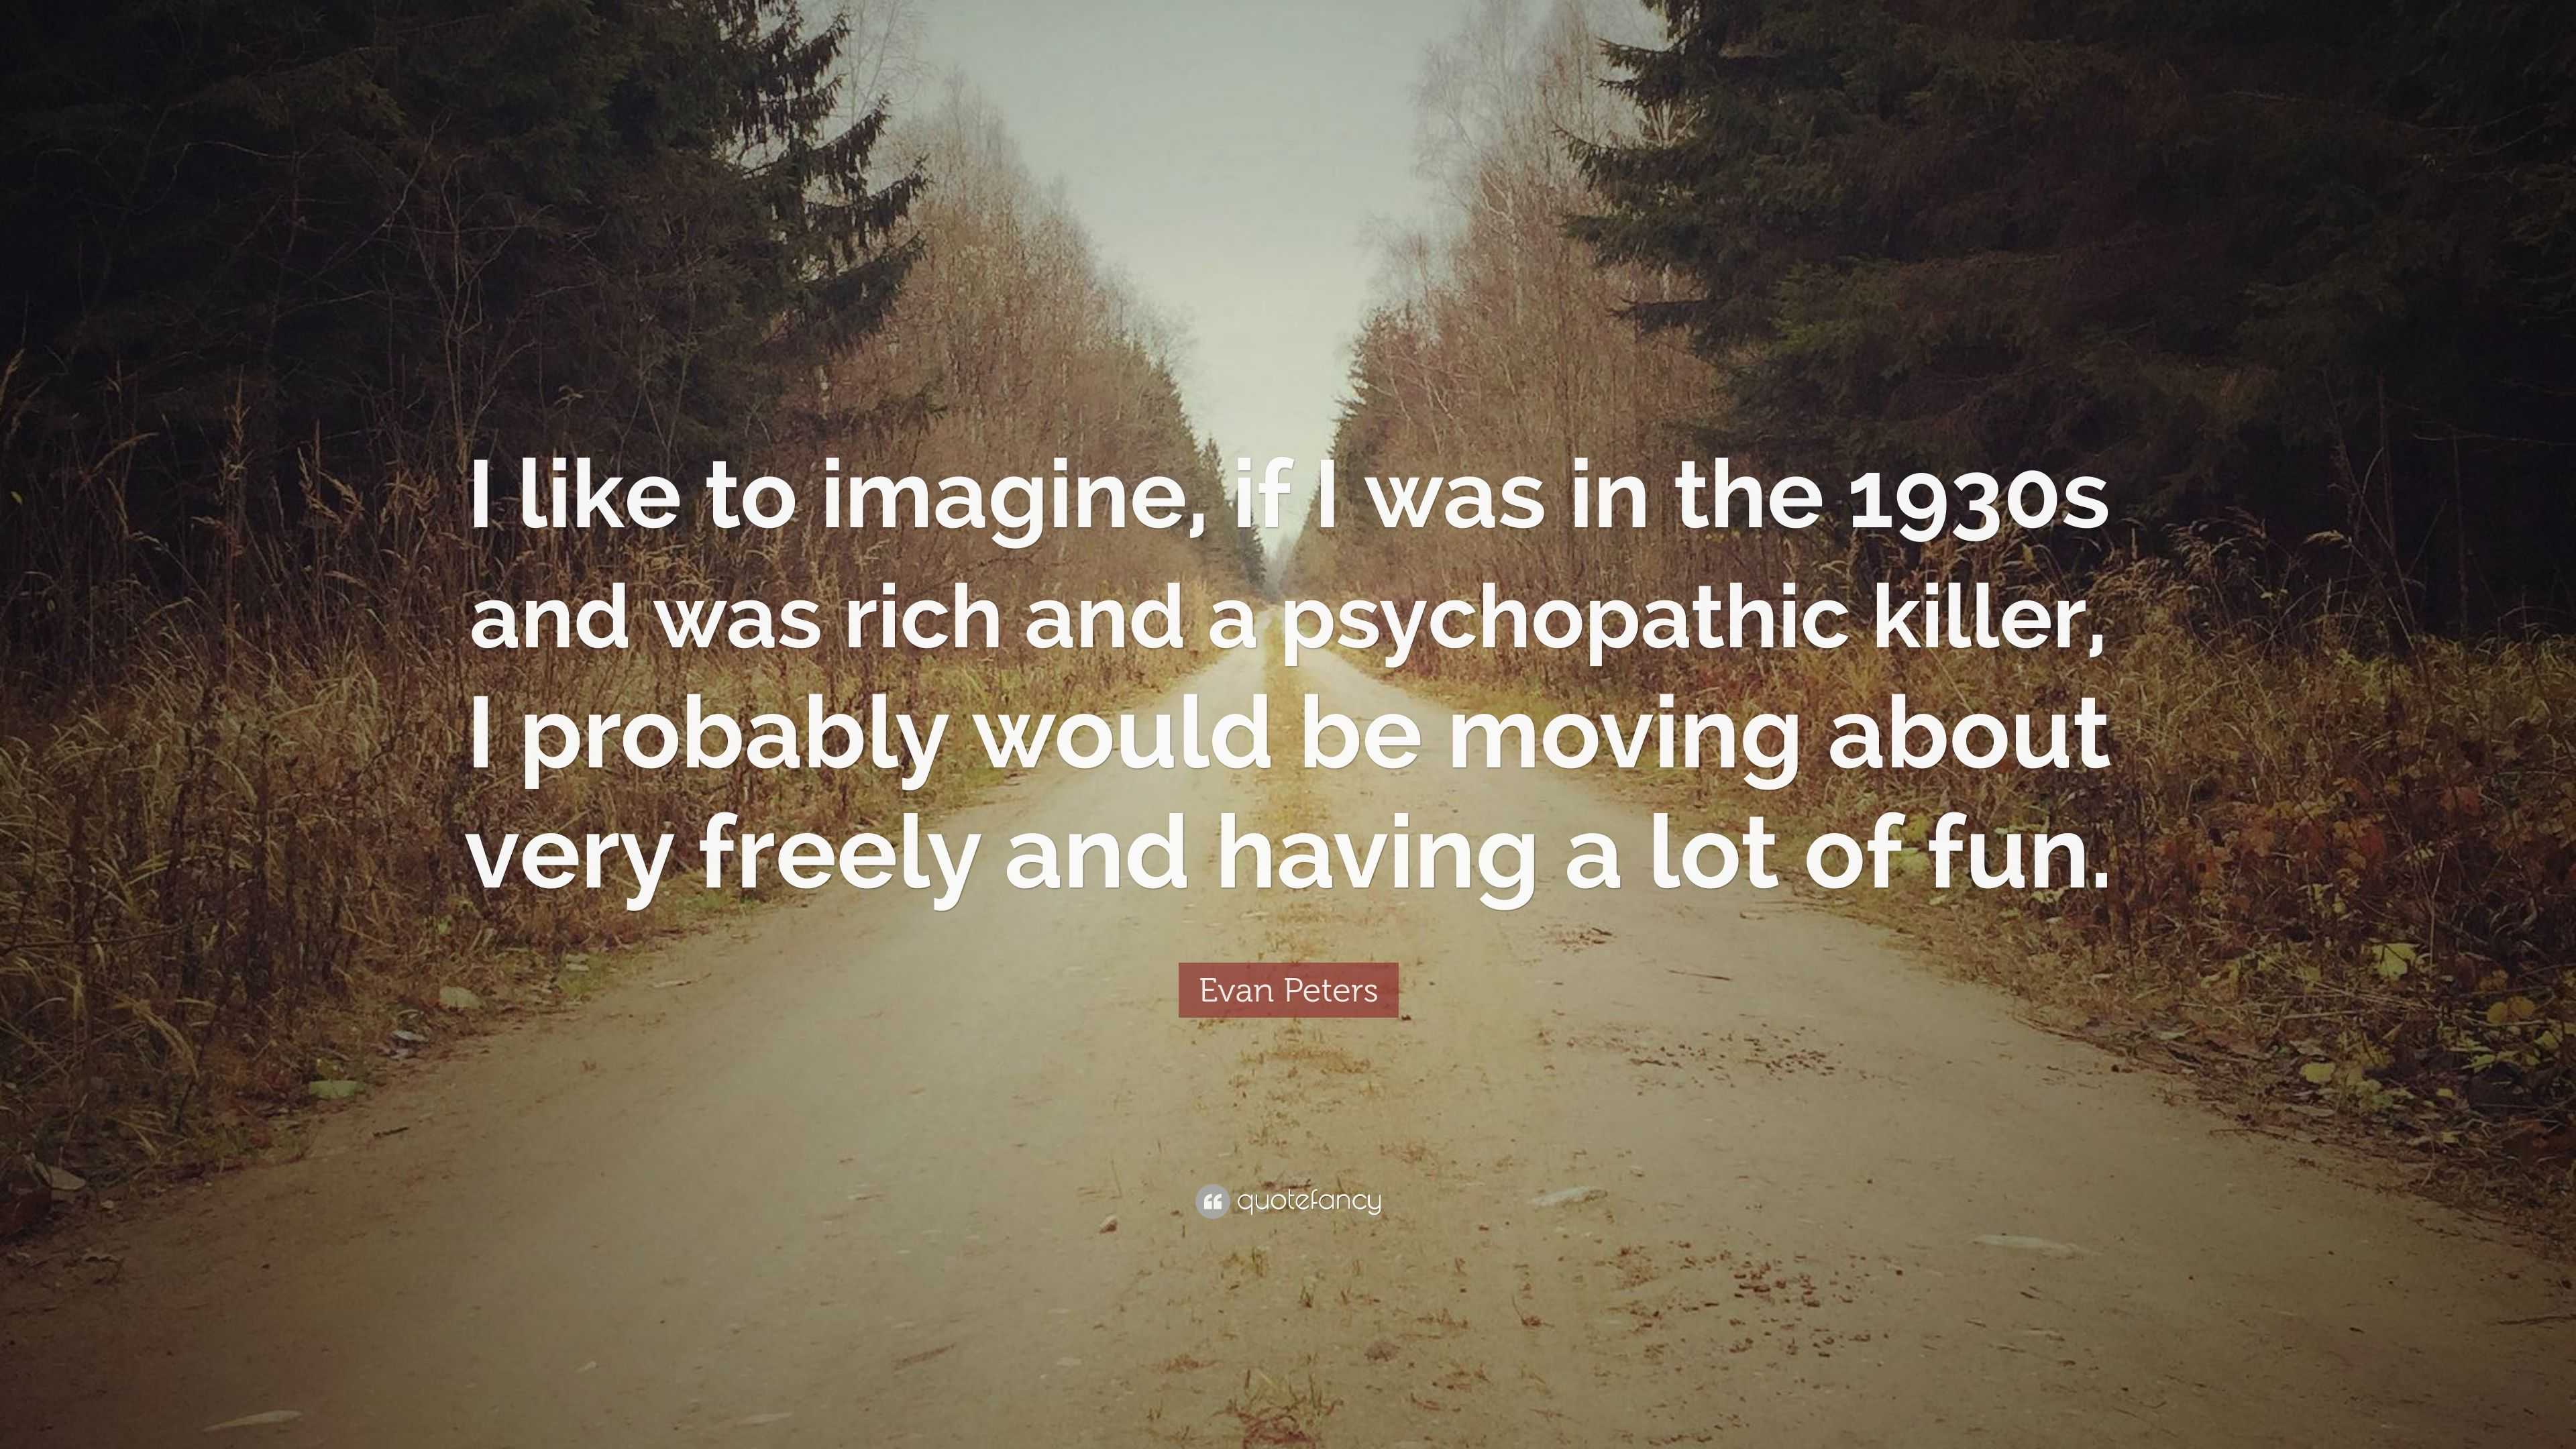 Evan Peters Quote: “I like to imagine, if I was in the 1930s and was ...